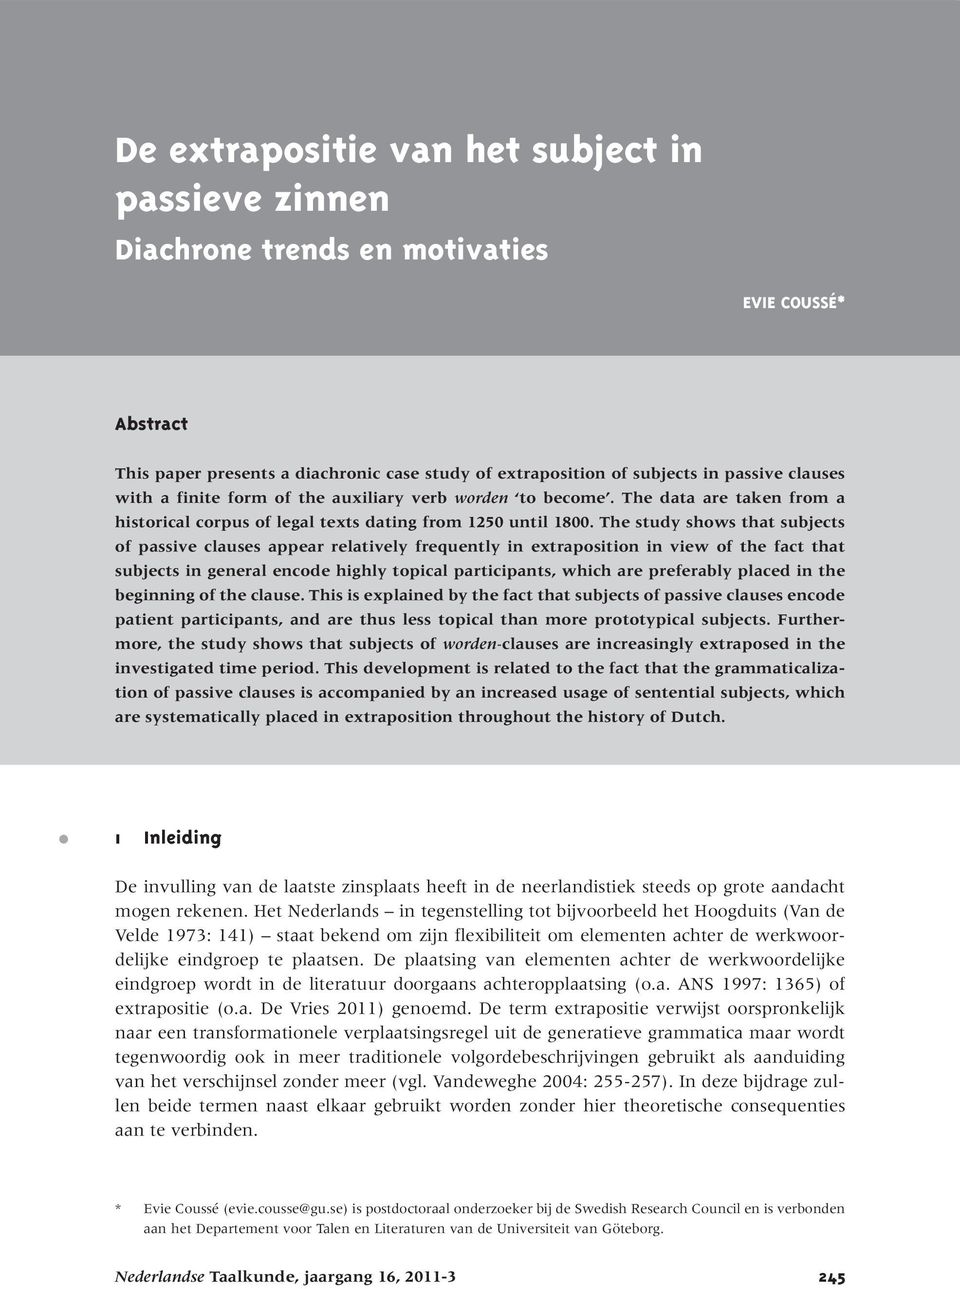 The study shows that subjects of passive clauses appear relatively frequently in extraposition in view of the fact that subjects in general encode highly topical participants, which are preferably